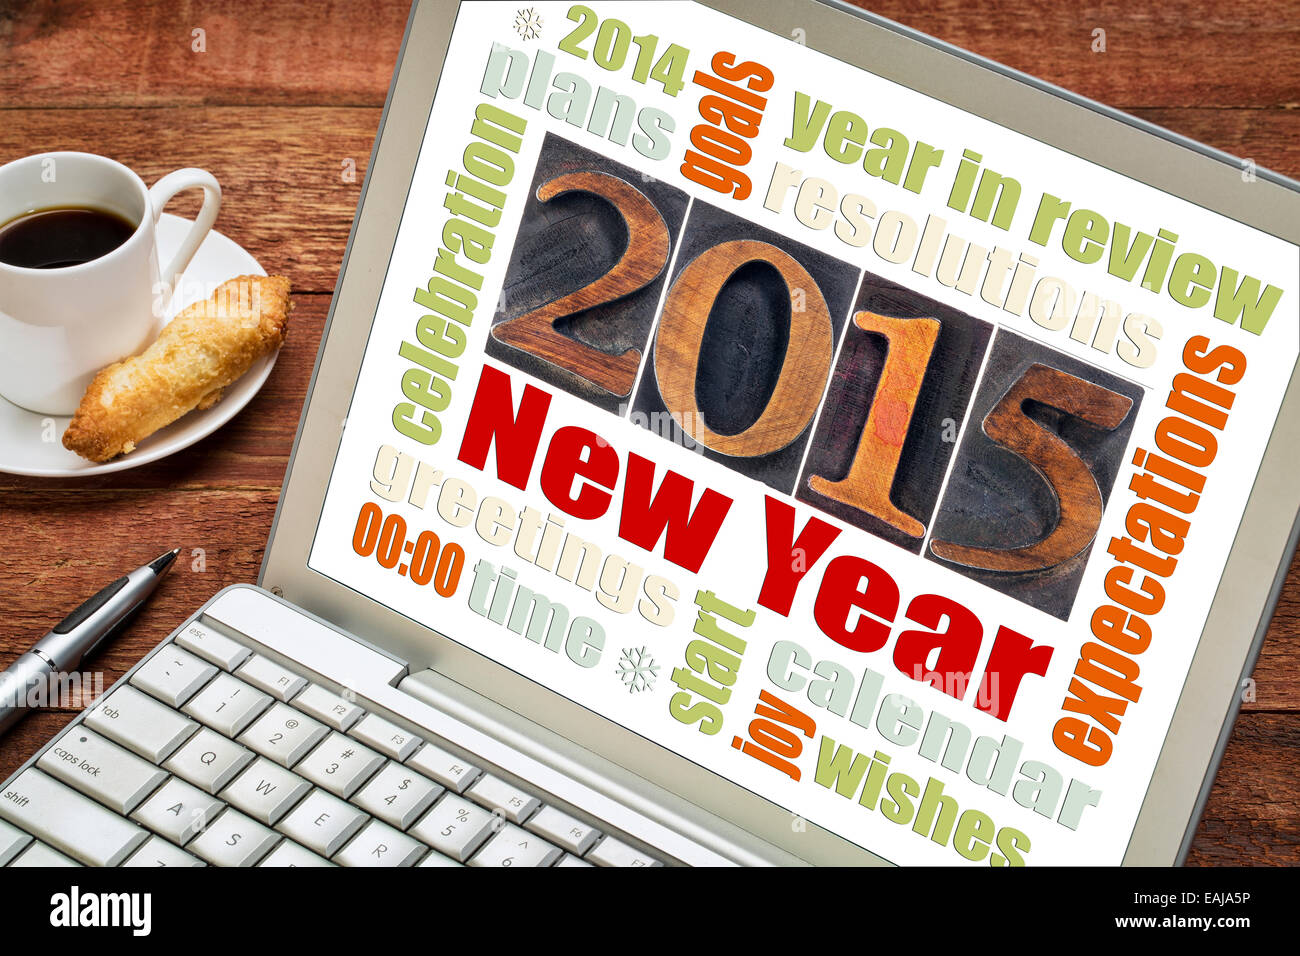 2015 New Year concept - word cloud on a laptop screen with a cup of coffee Stock Photo